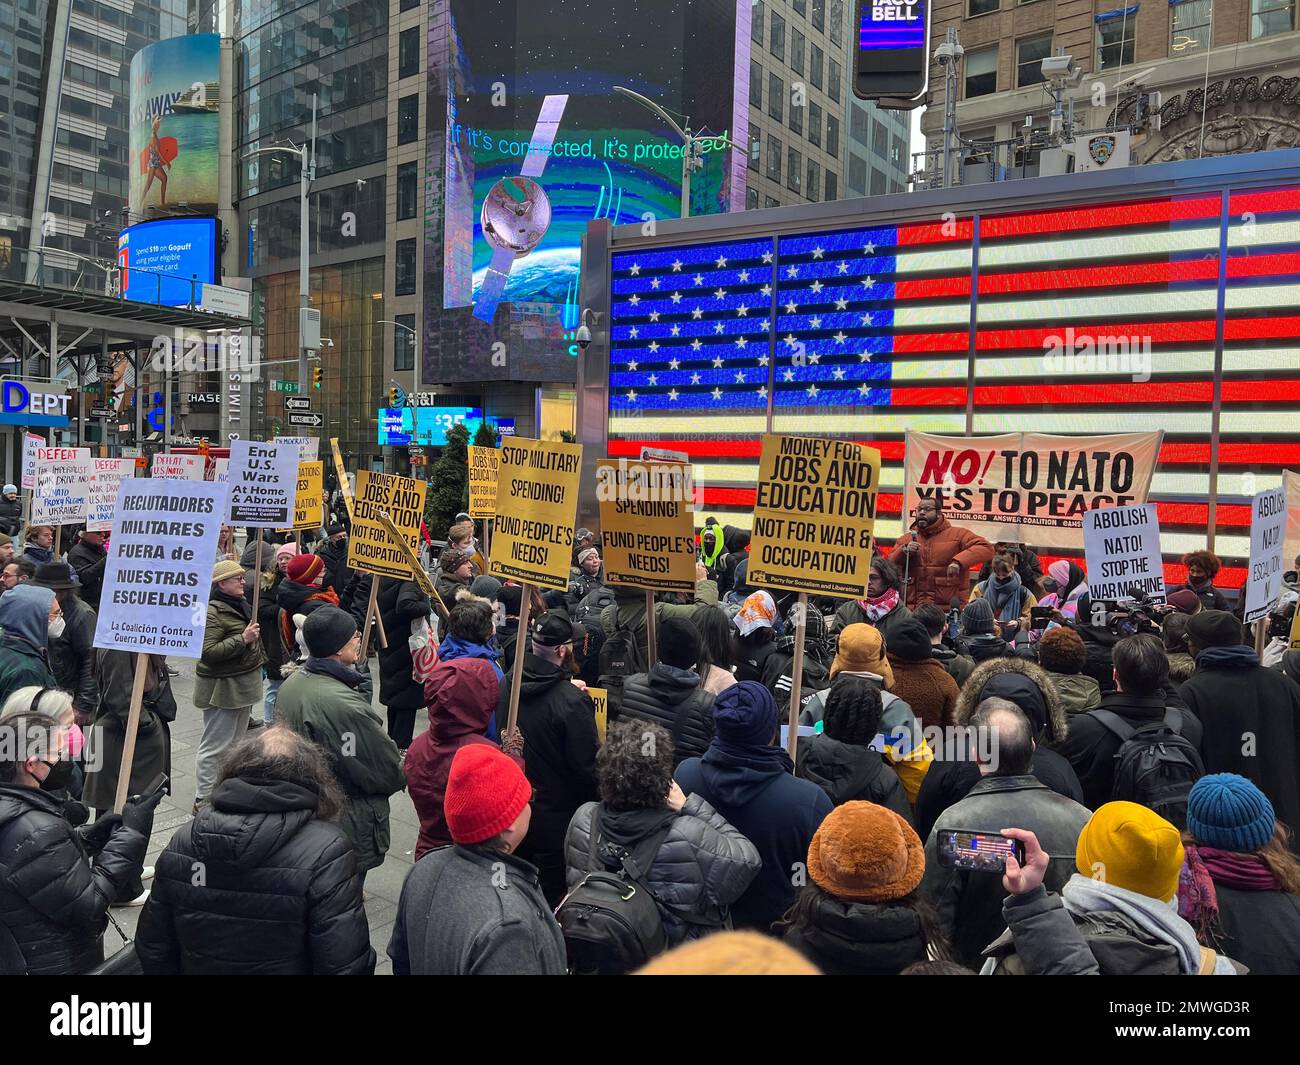 Peace activists and anti-militarists looking for negotiations in Ukraine rather than NATO escelating the war rally in Times Square by the military recruitment center in New York CIty during Martin Luther King Day weekend. Stock Photo